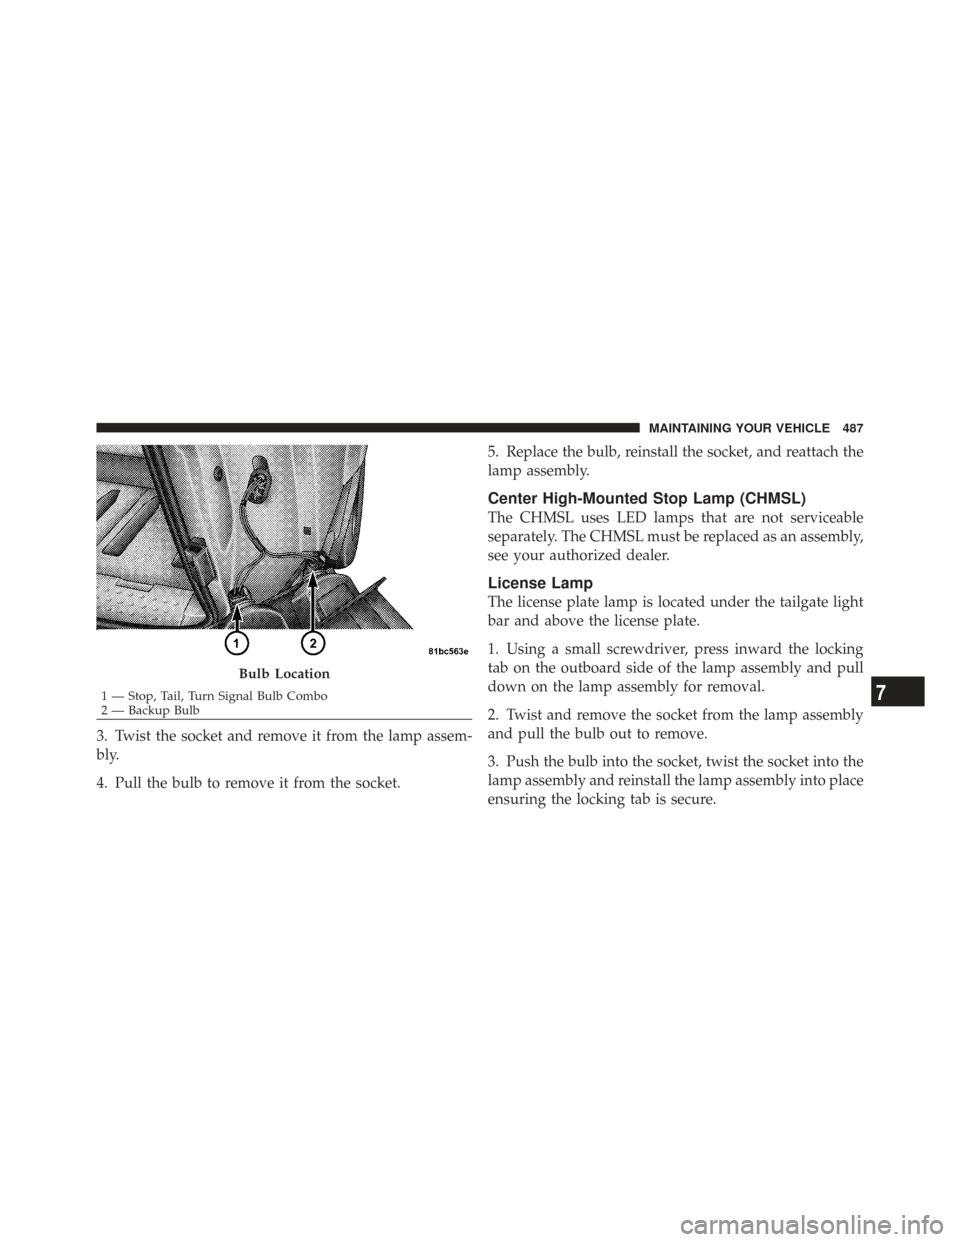 CHRYSLER TOWN AND COUNTRY 2009 5.G Owners Manual 3. Twist the socket and remove it from the lamp assem-
bly.
4. Pull the bulb to remove it from the socket.5. Replace the bulb, reinstall the socket, and reattach the
lamp assembly.
Center High-Mounted